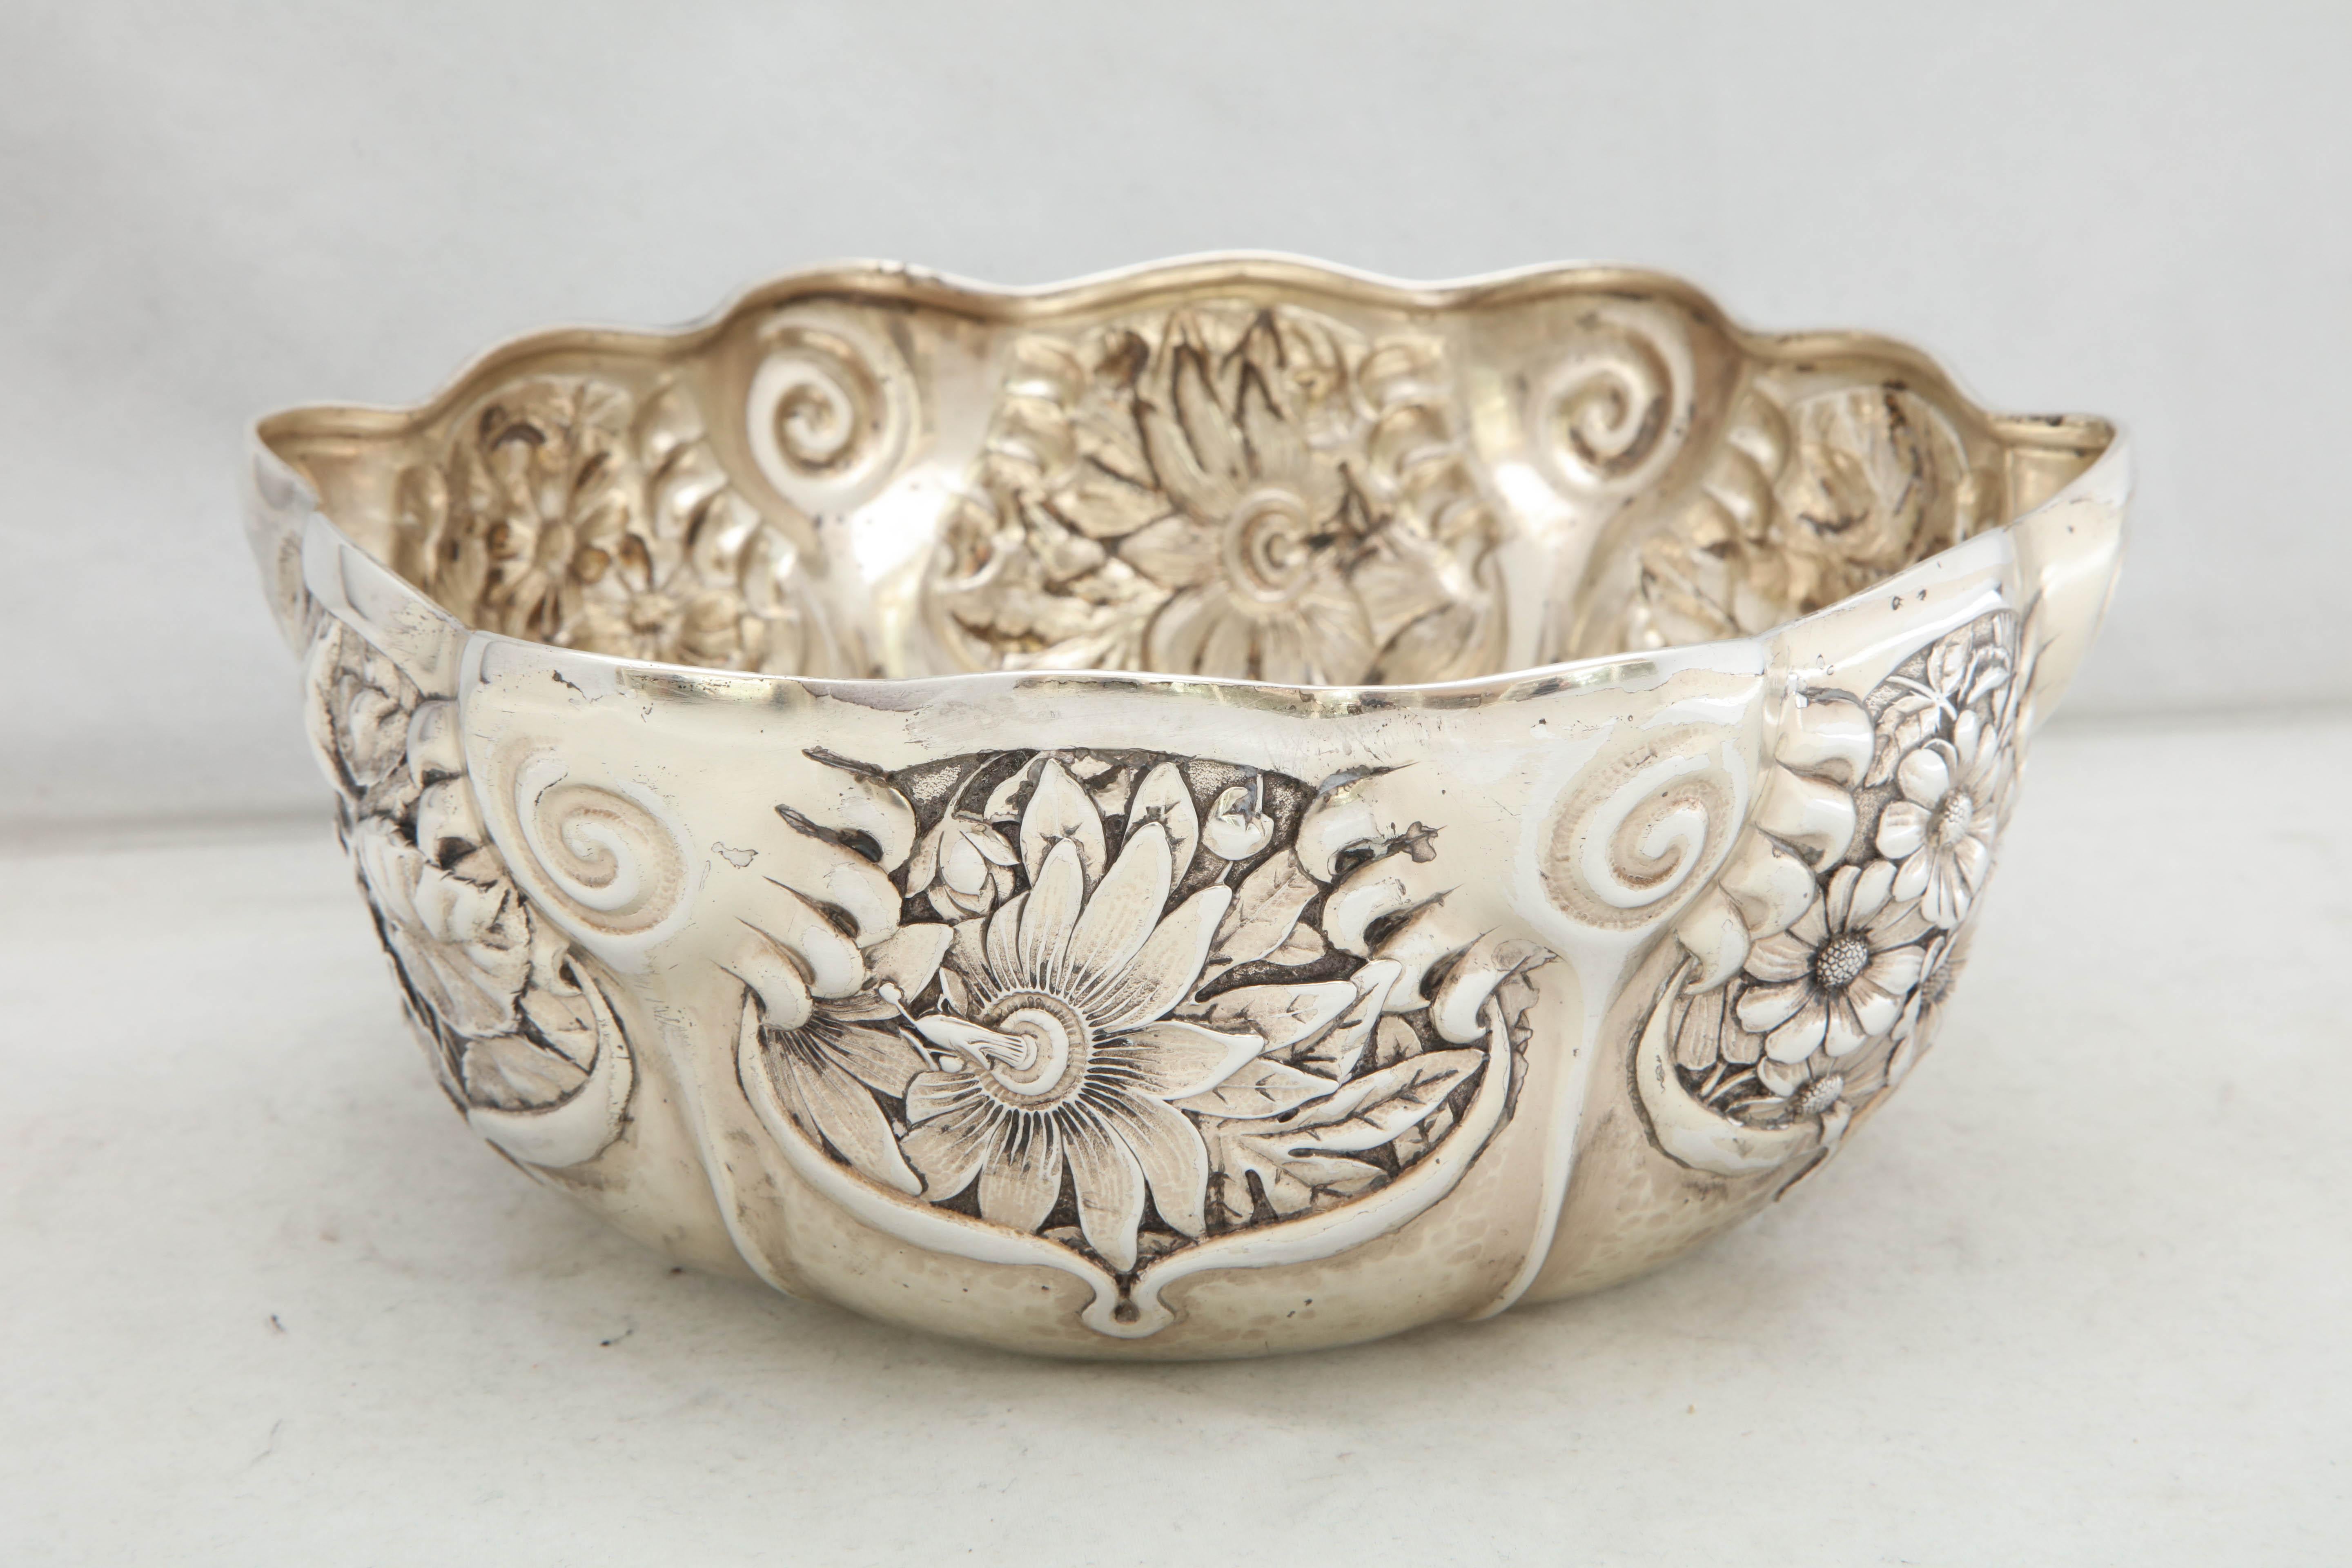 American Art Nouveau Sterling Silver Serving Bowl by Whiting Mfg. Co